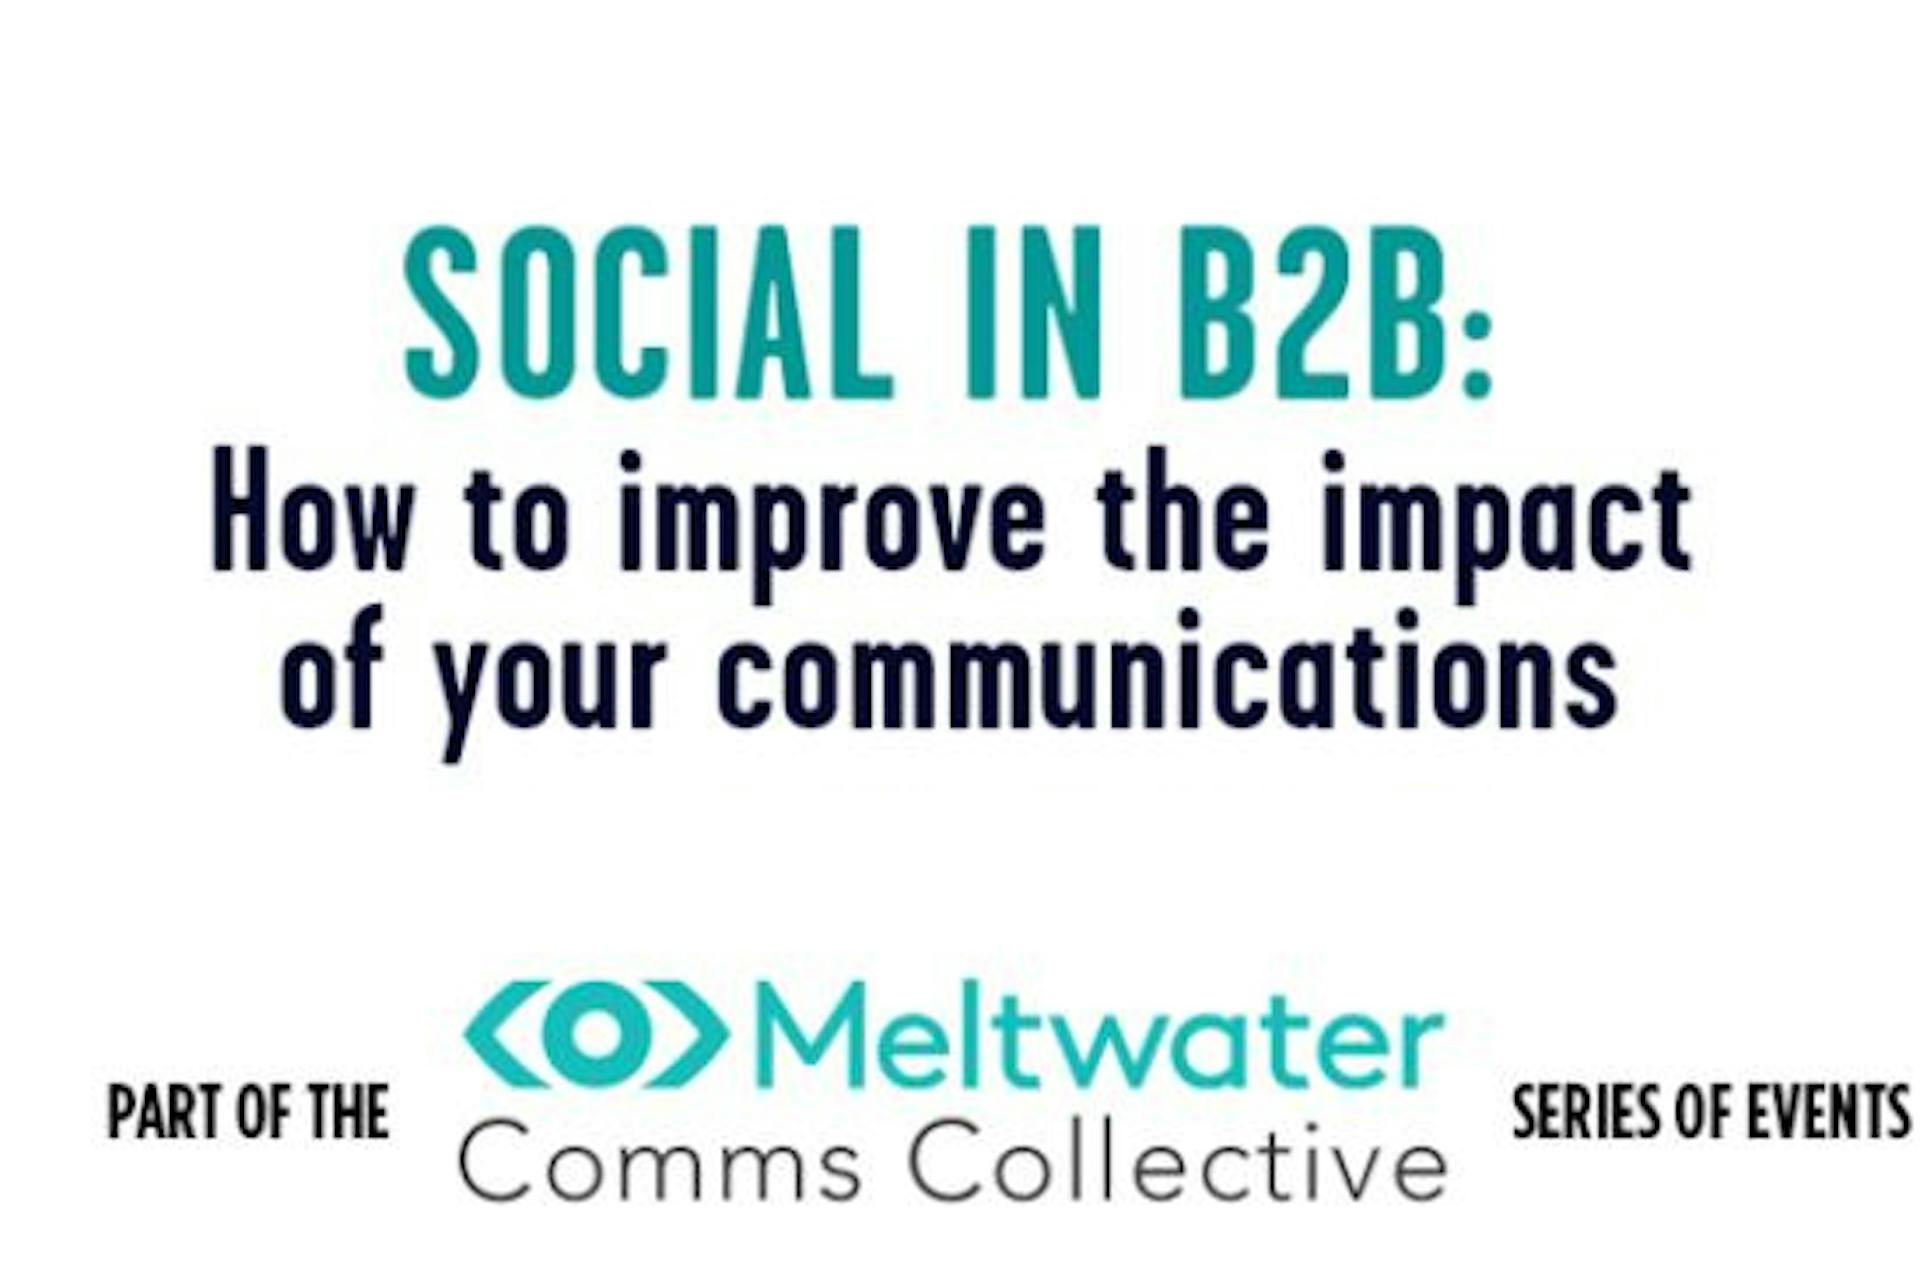 Social In B2B: How to improve the impact of your communications